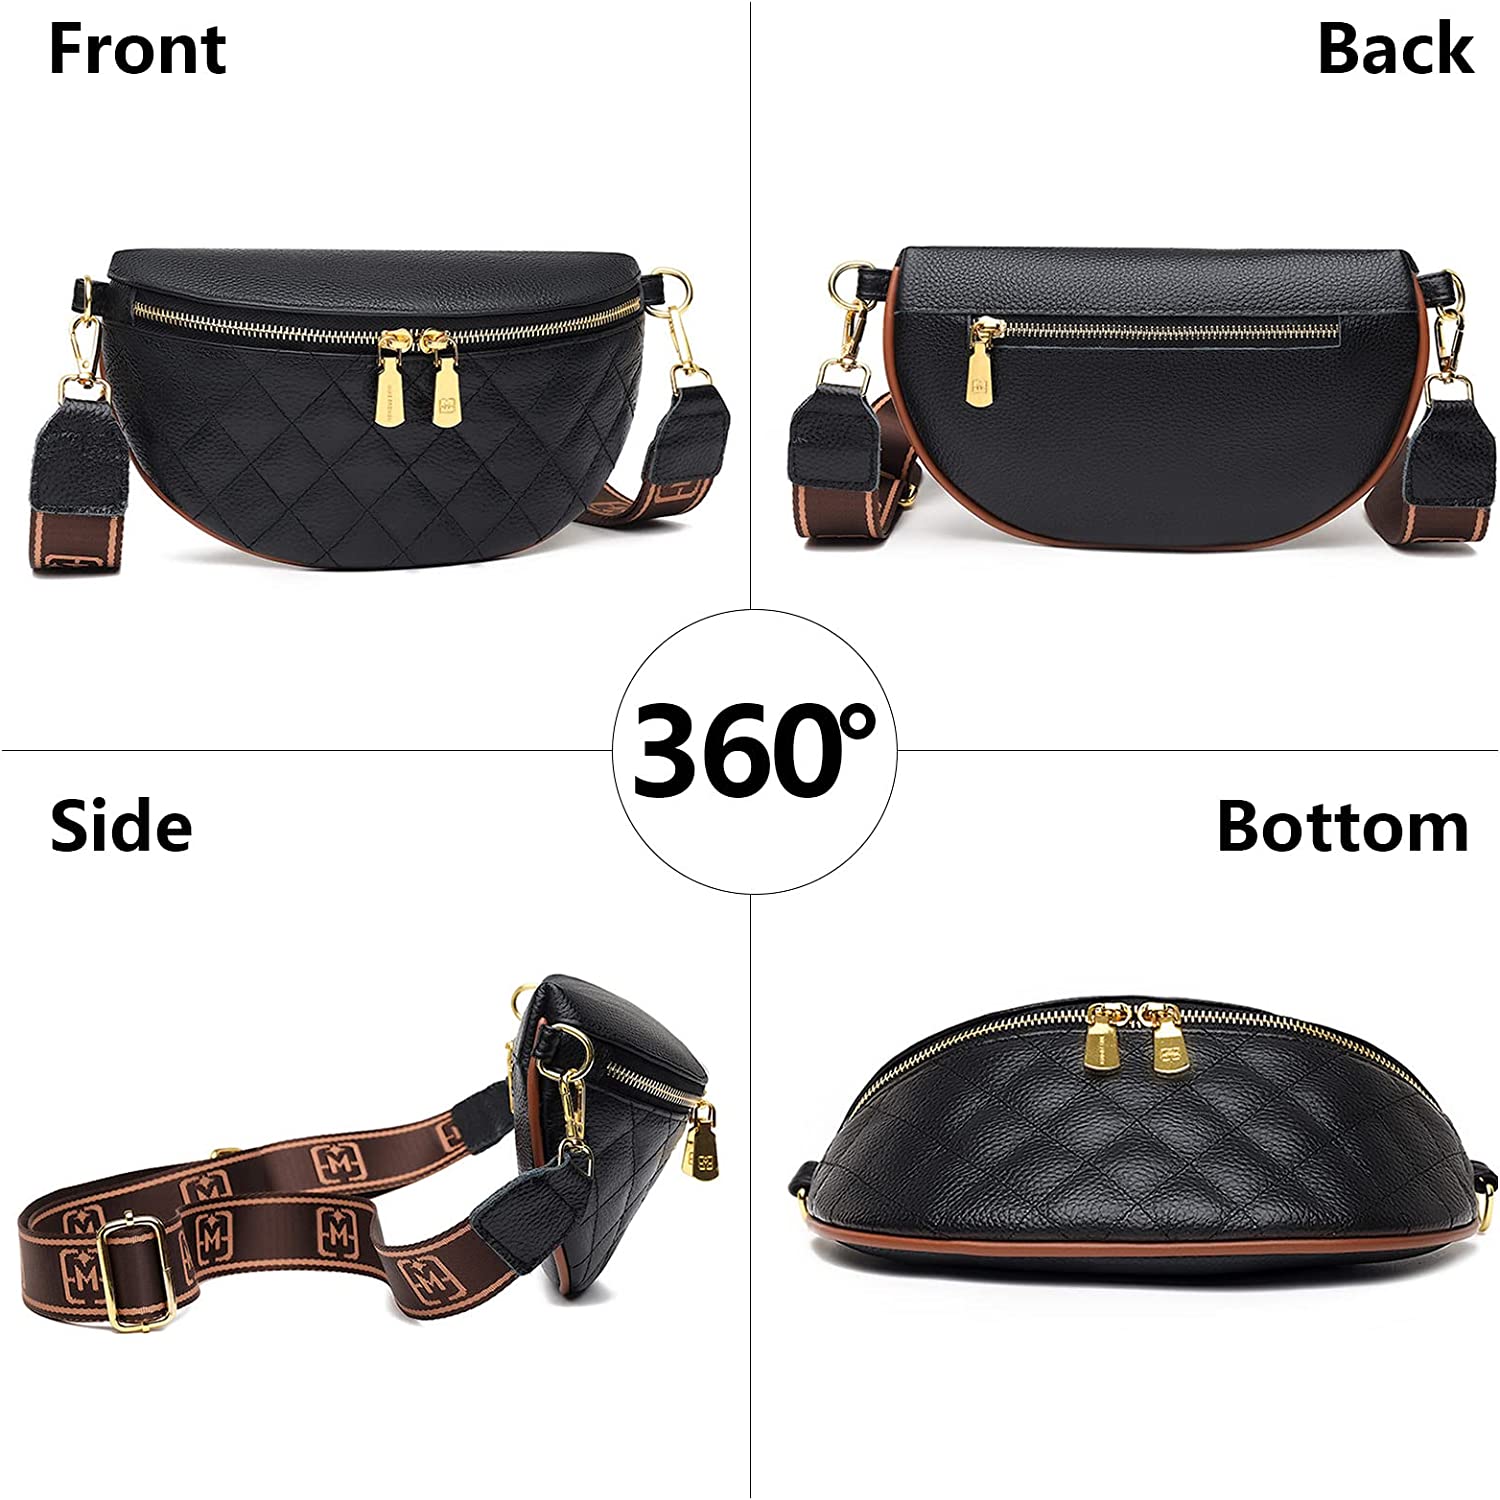 Fashion Stone Pattern PU Leather Chain Waist Bag Fashion Bag On A Belt  Leisure Fanny Pack Women Satchel Belly Band Belt From Just4urwear, $35.73